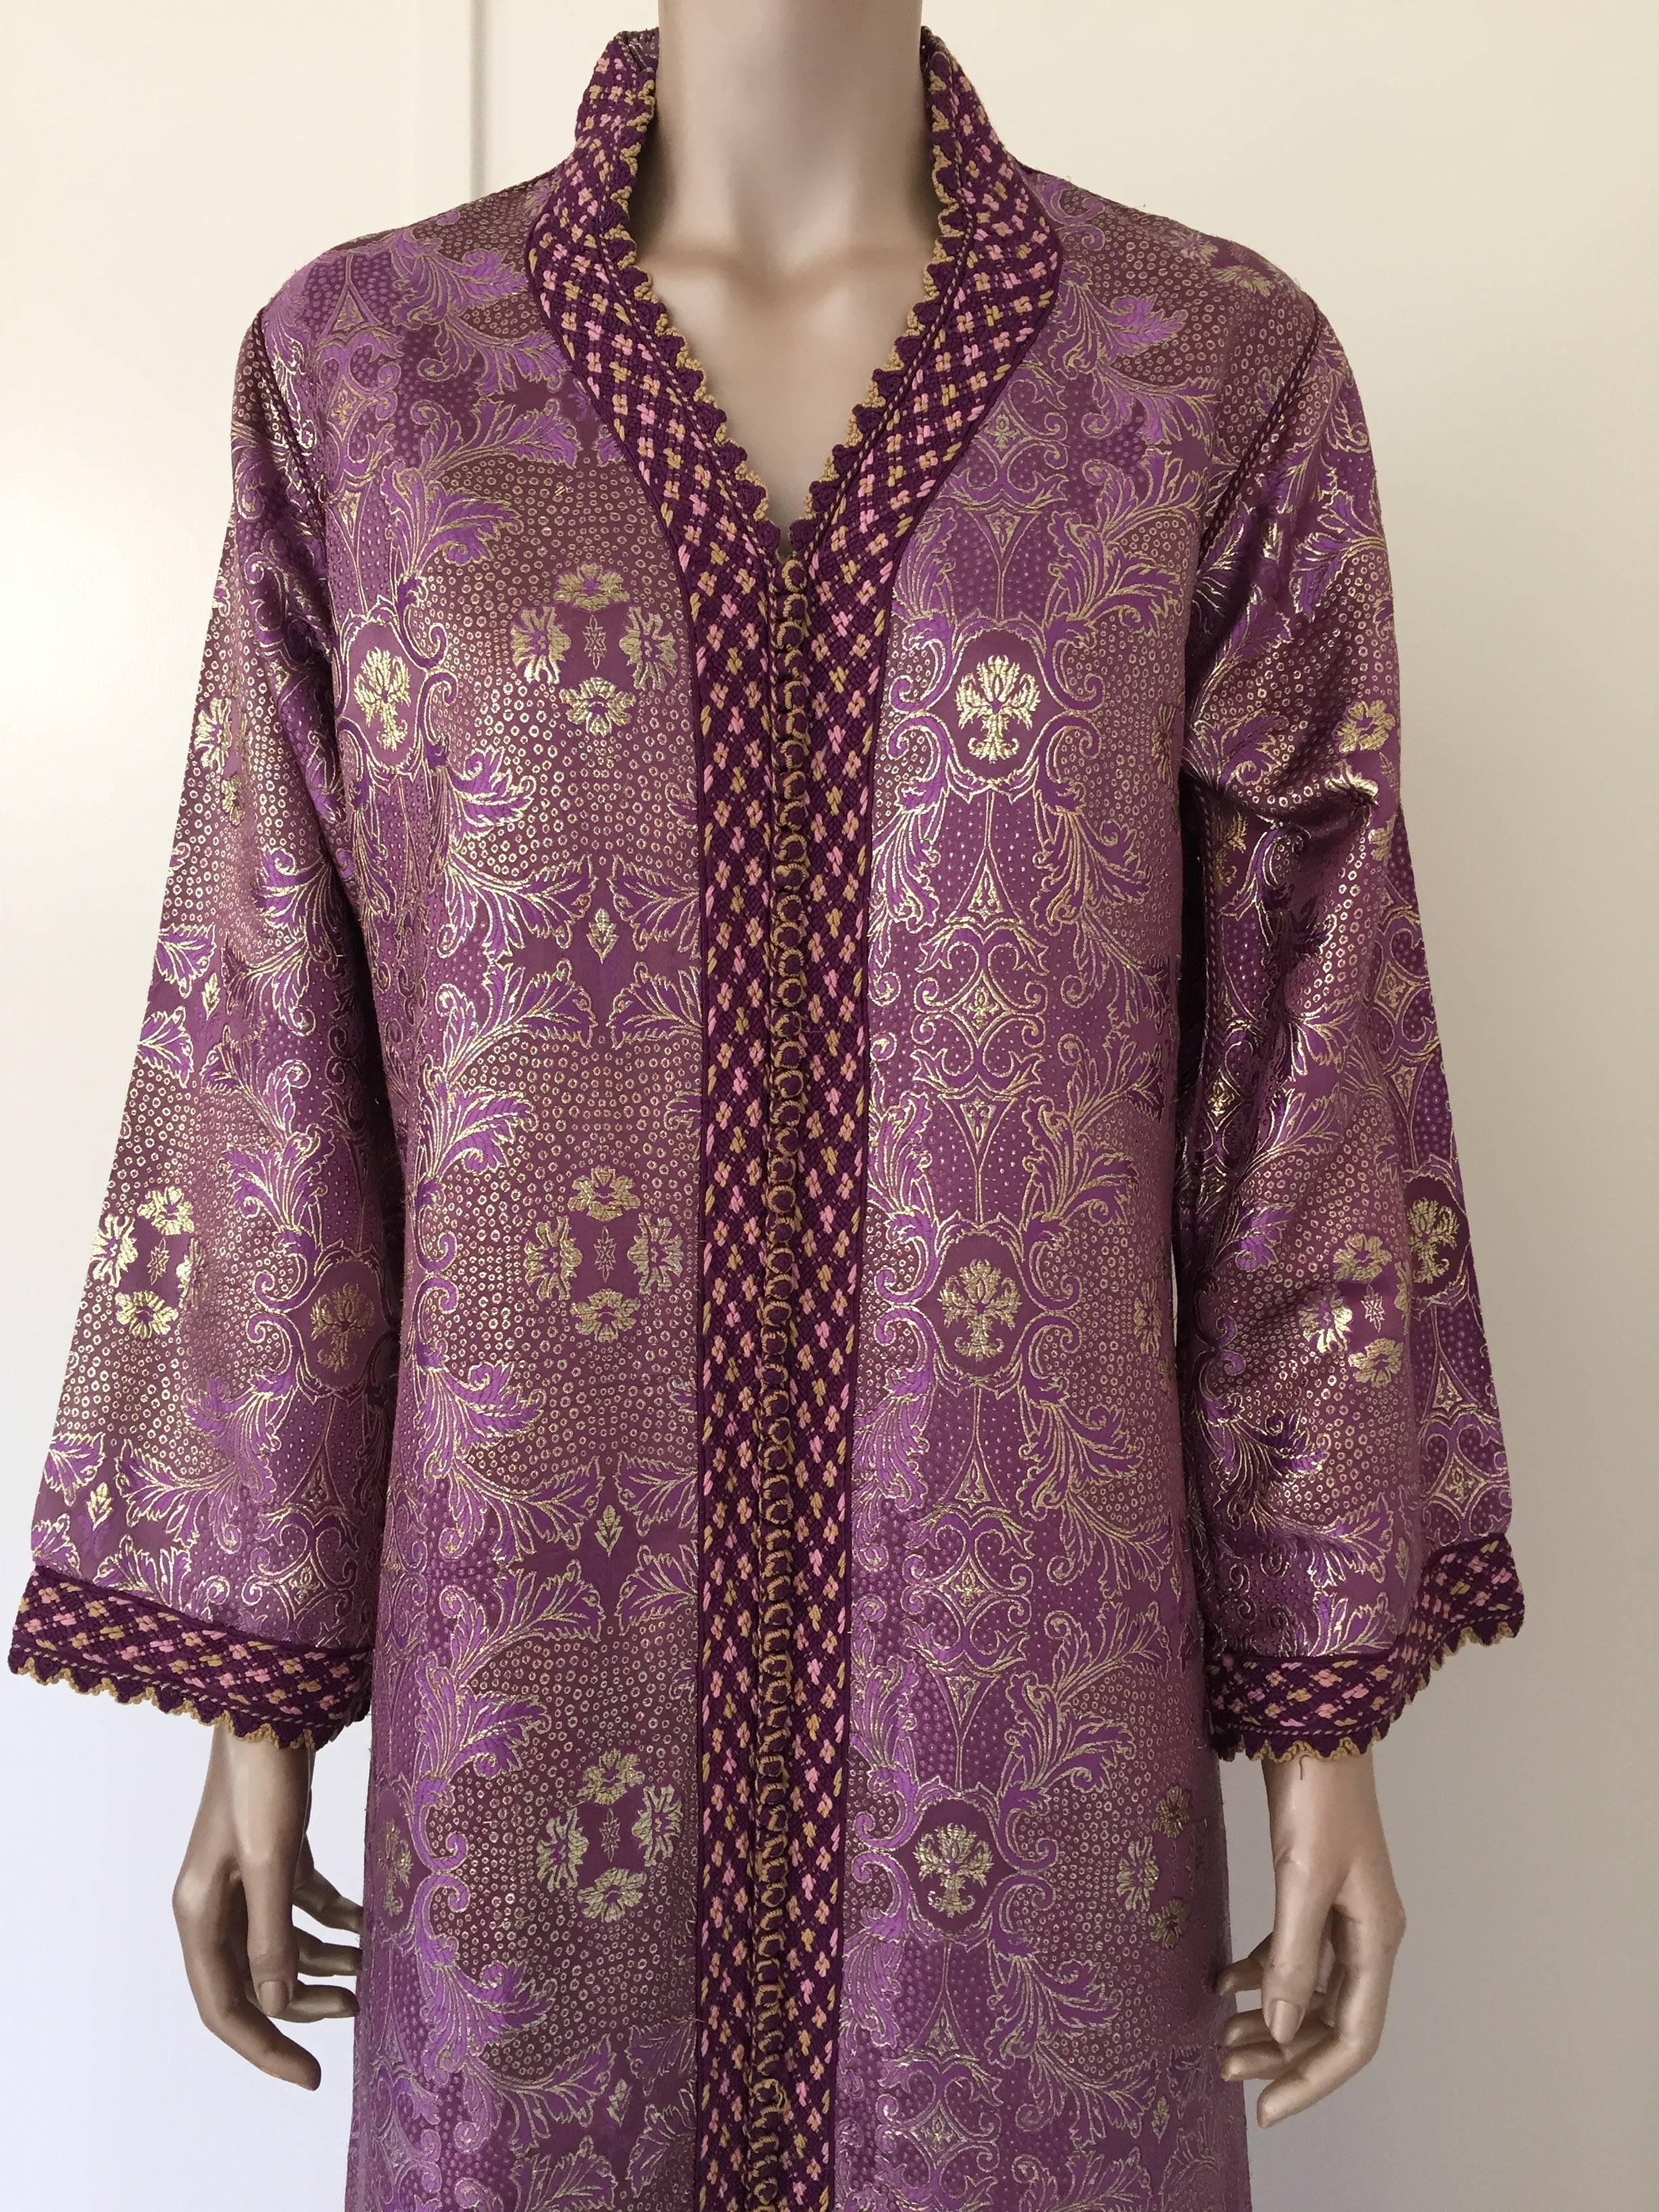 Elegant Moroccan caftan purple color lame,
circa 1980s.
This long maxi dress kaftan is embroidered and embellished entirely by hand.
One of a kind evening Moroccan Middle Eastern Royal gown.
The kaftan features a traditional neckline and embellished